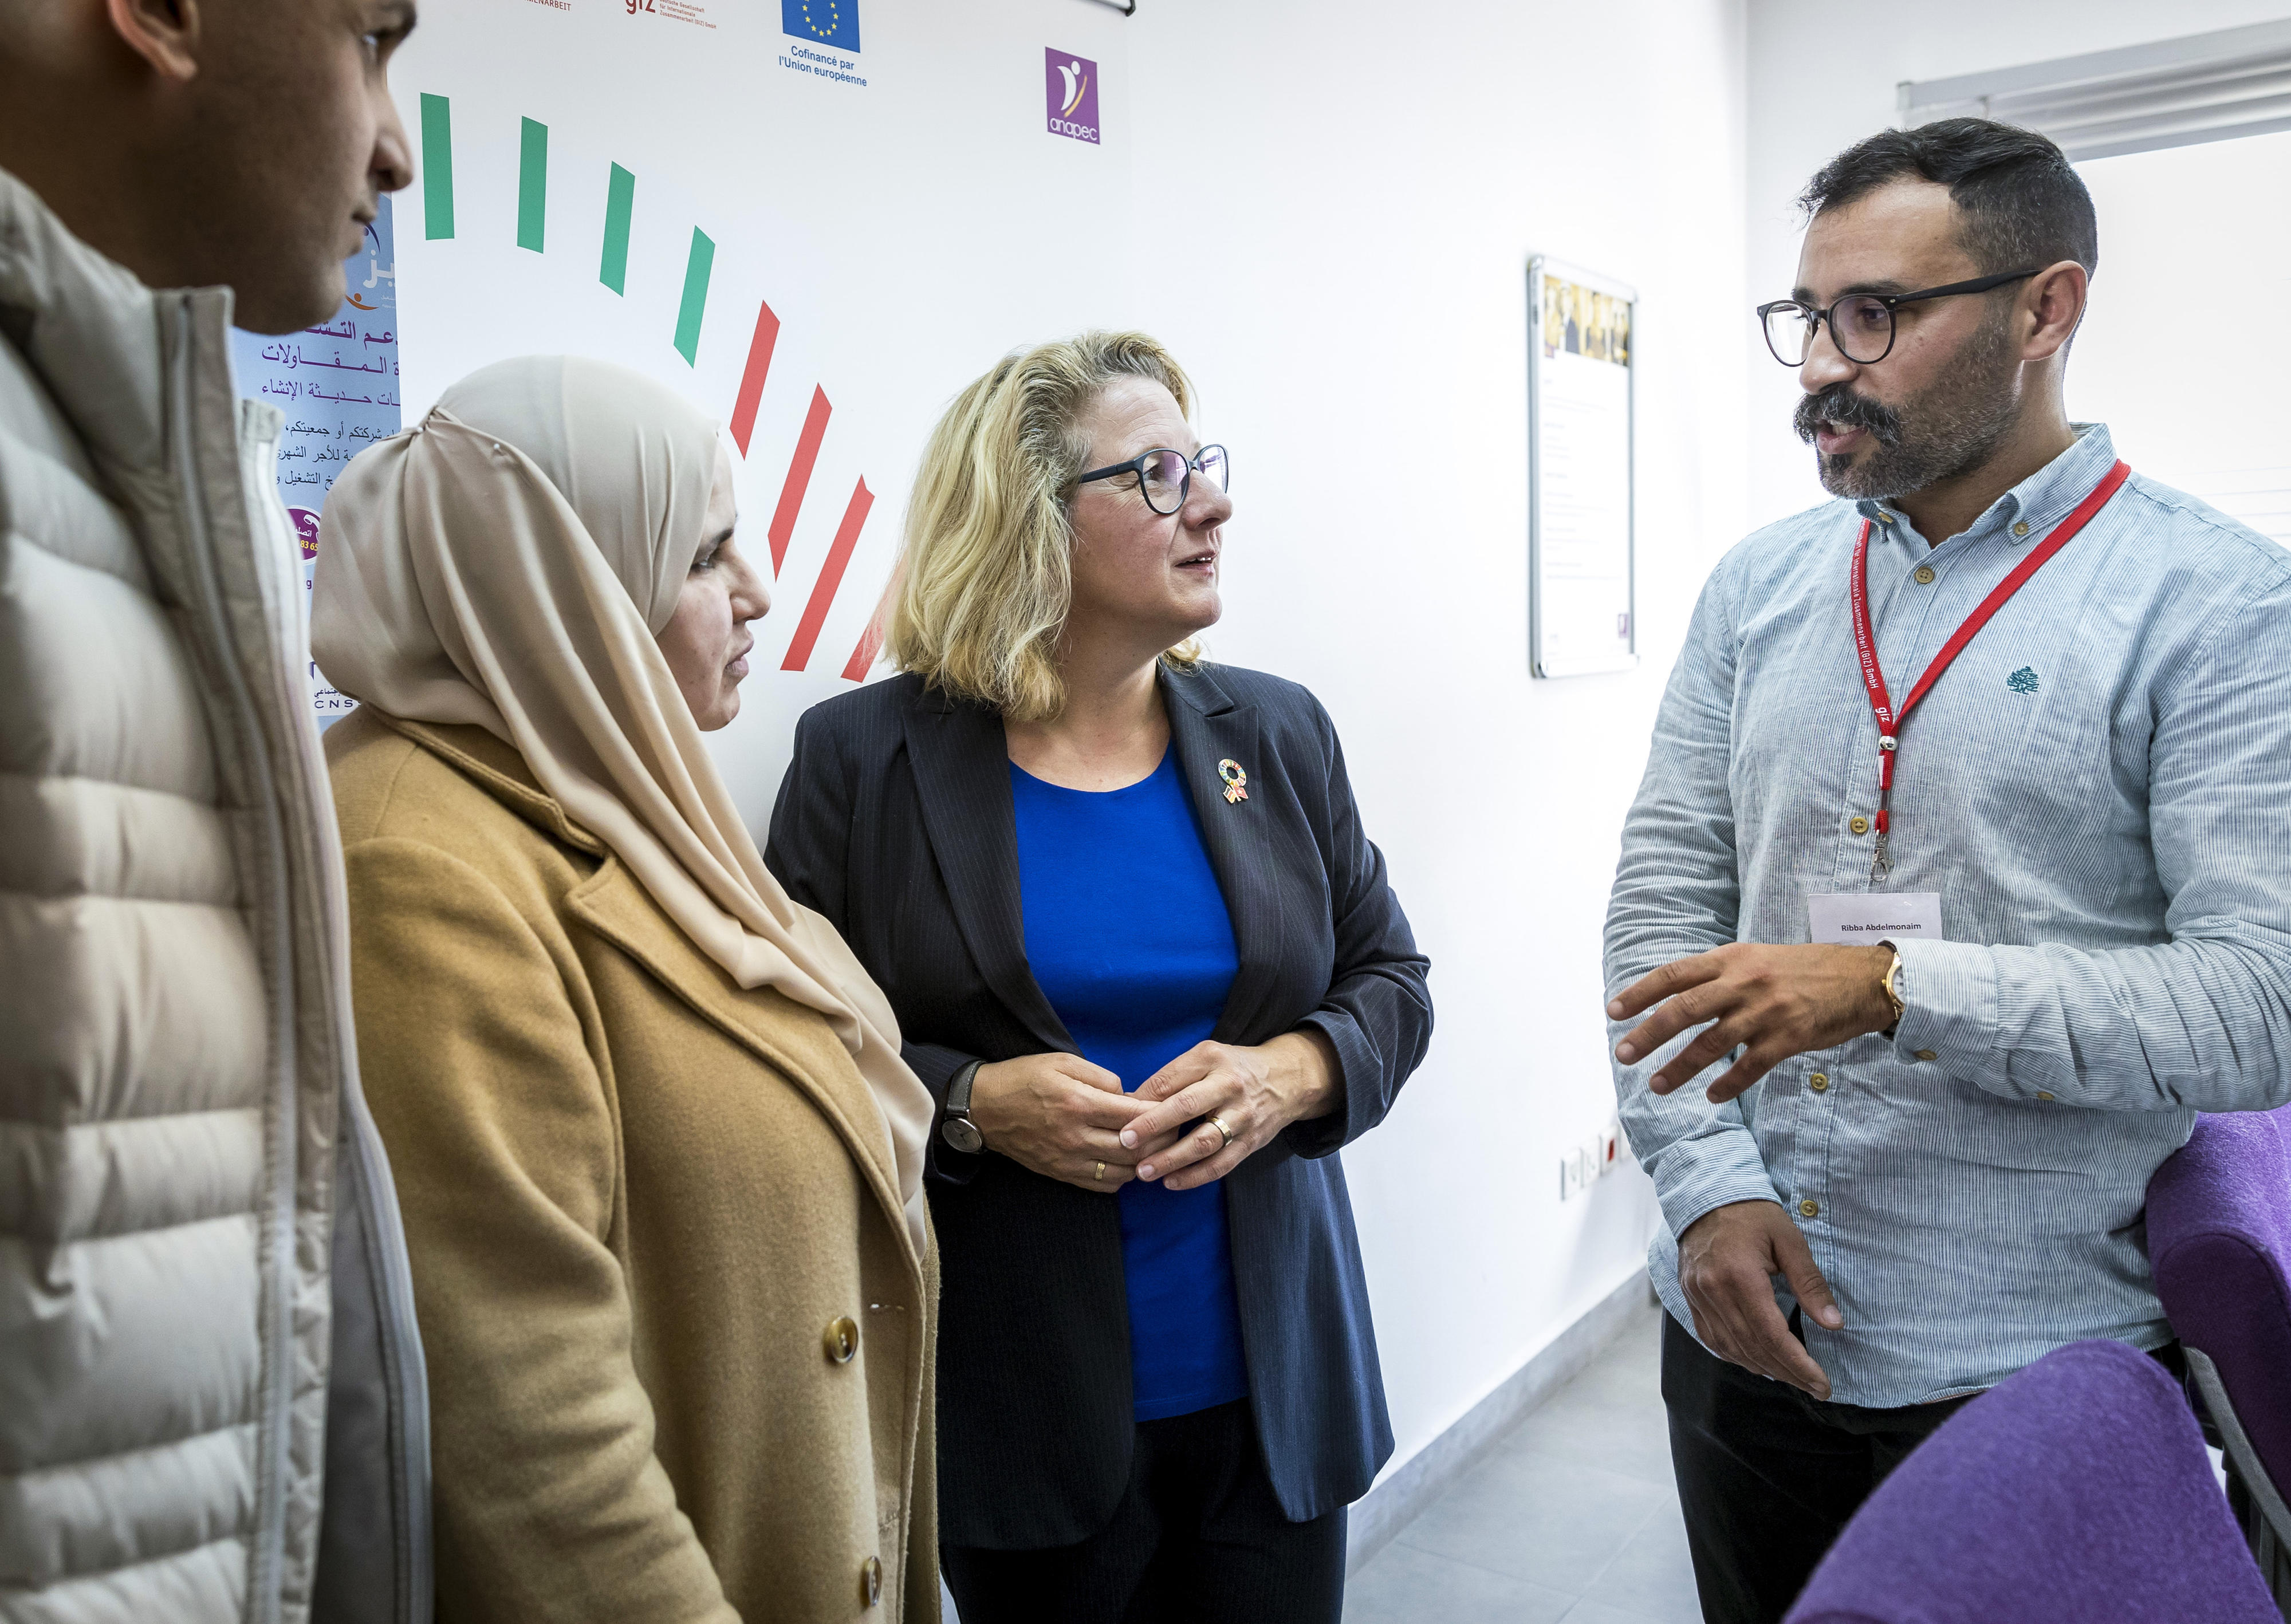 Visit to the Centre for Migration and Development in Rabat: Minister Svenja Schulze in conversation with participants in a support programme who are interested in working as skilled workers in Germany.